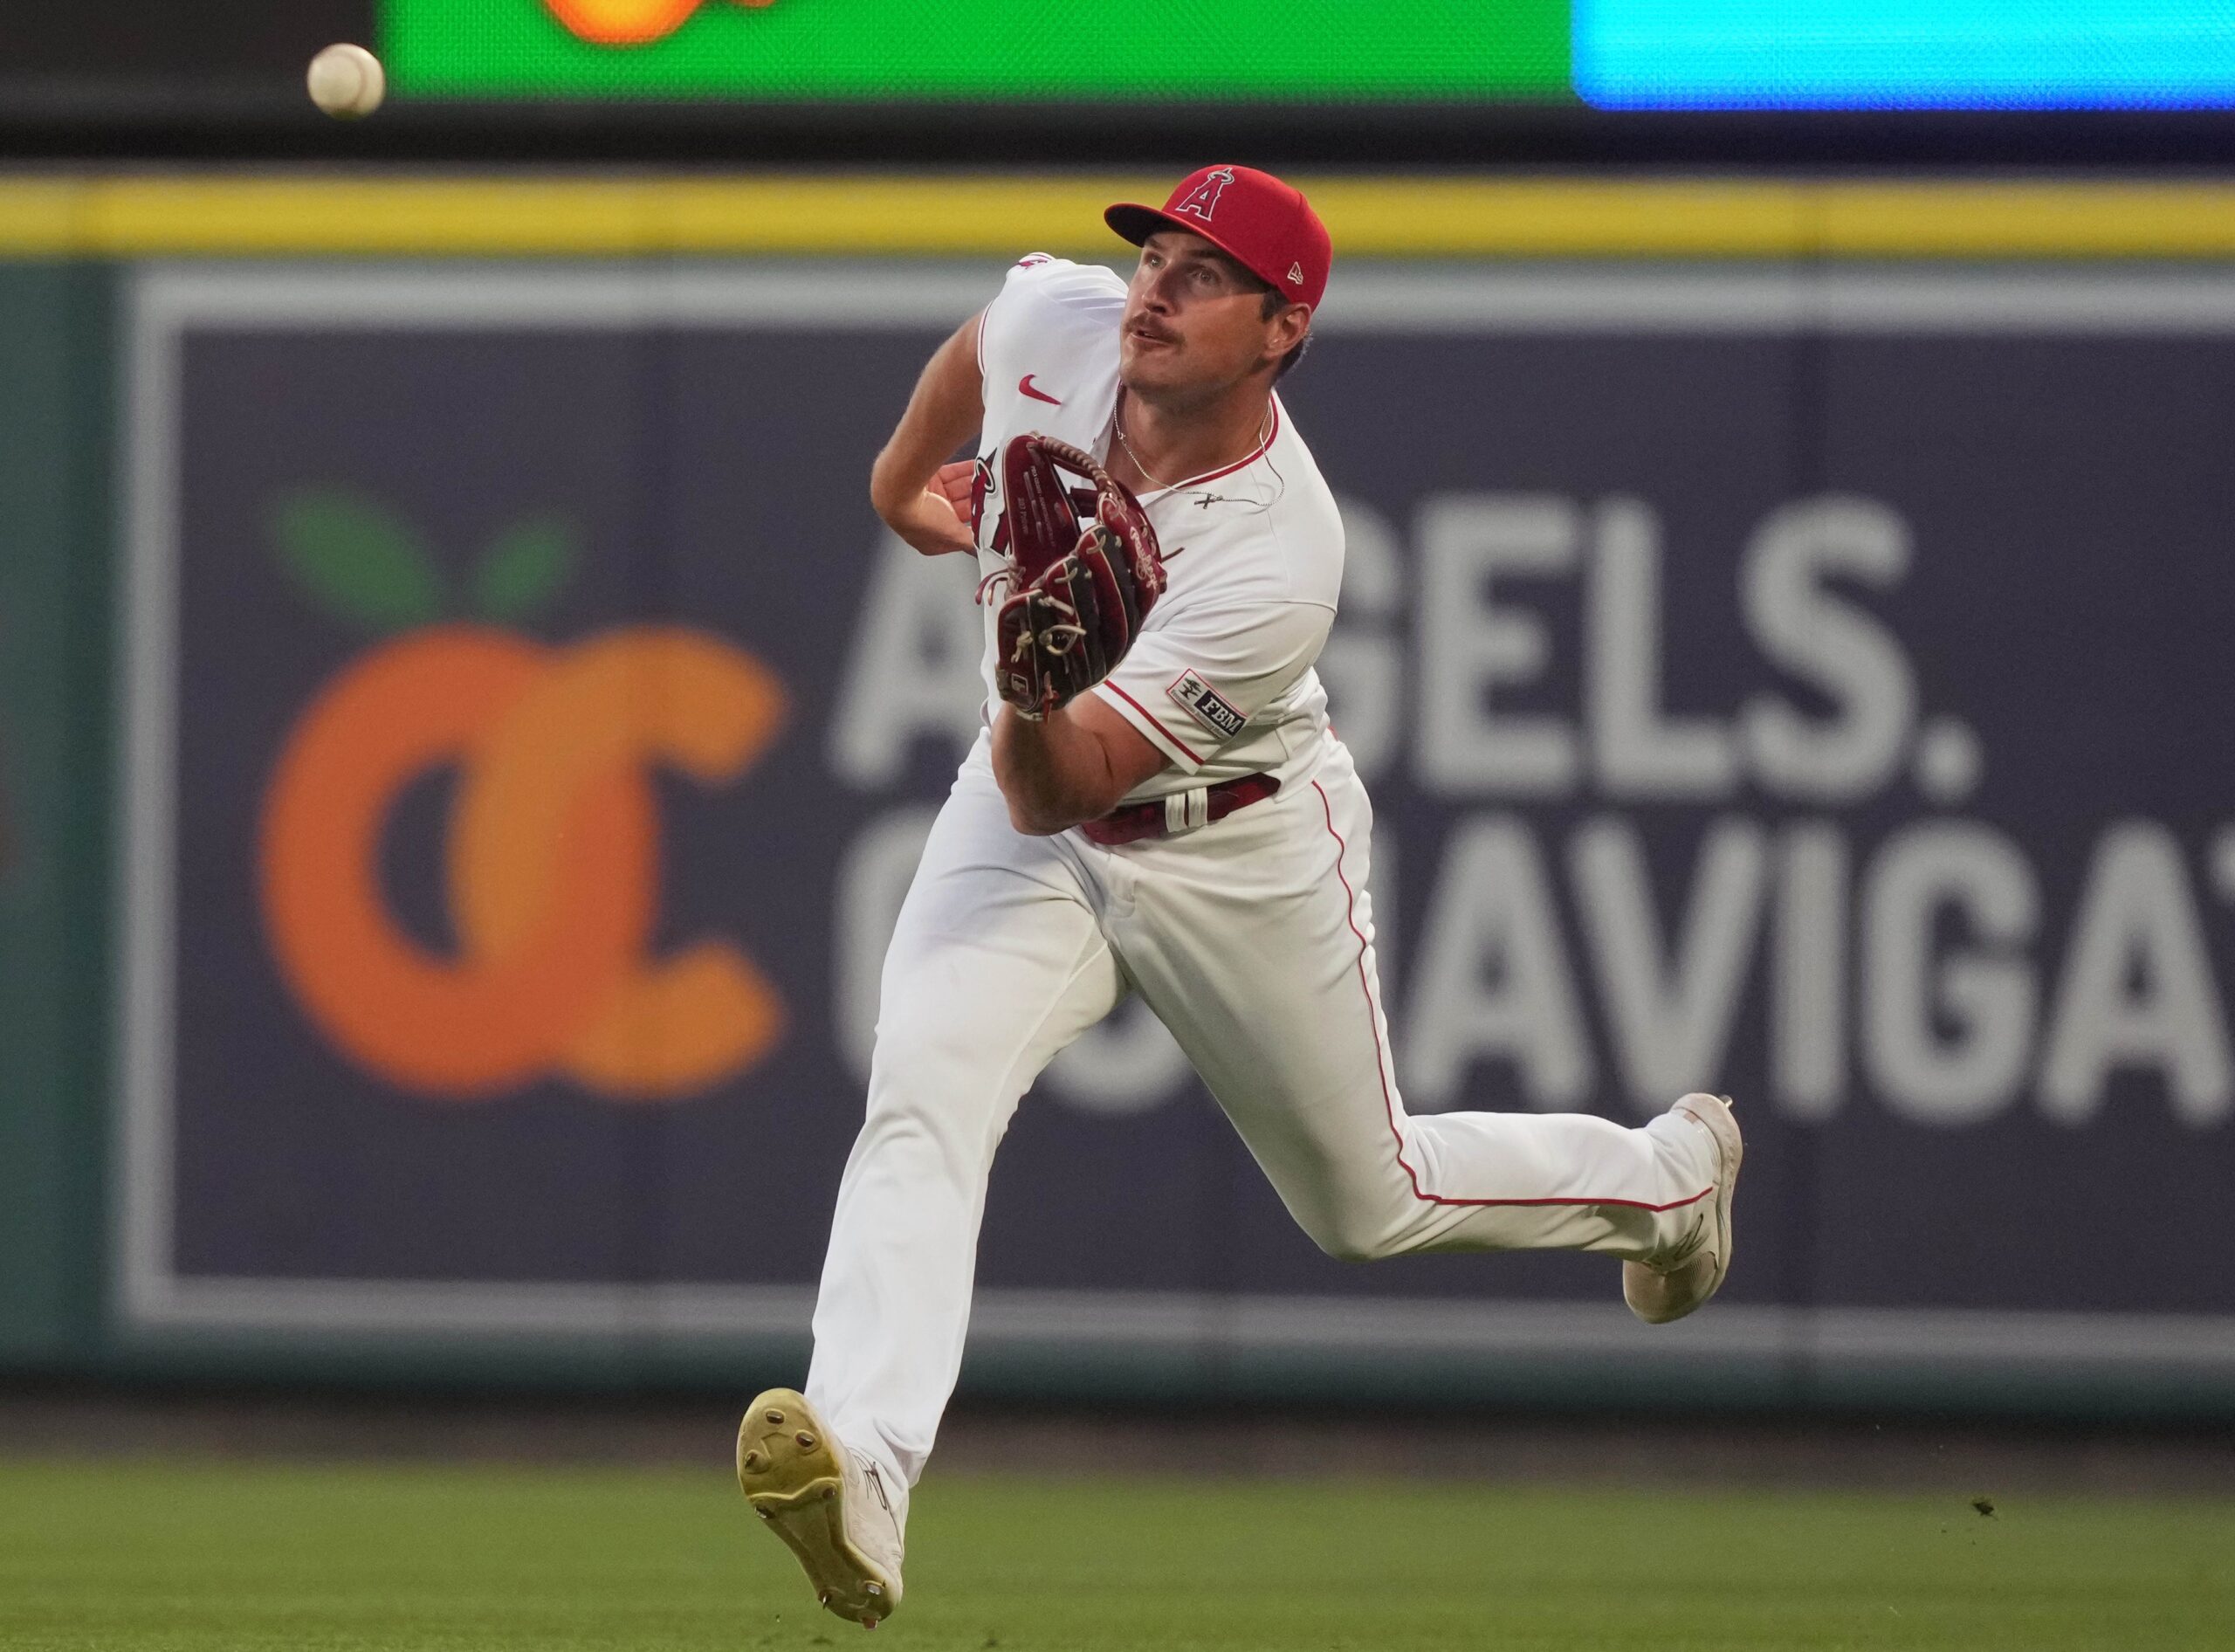 Angels News: Hunter Renfroe Seeing Starts At 1B To 'Help The Team Win